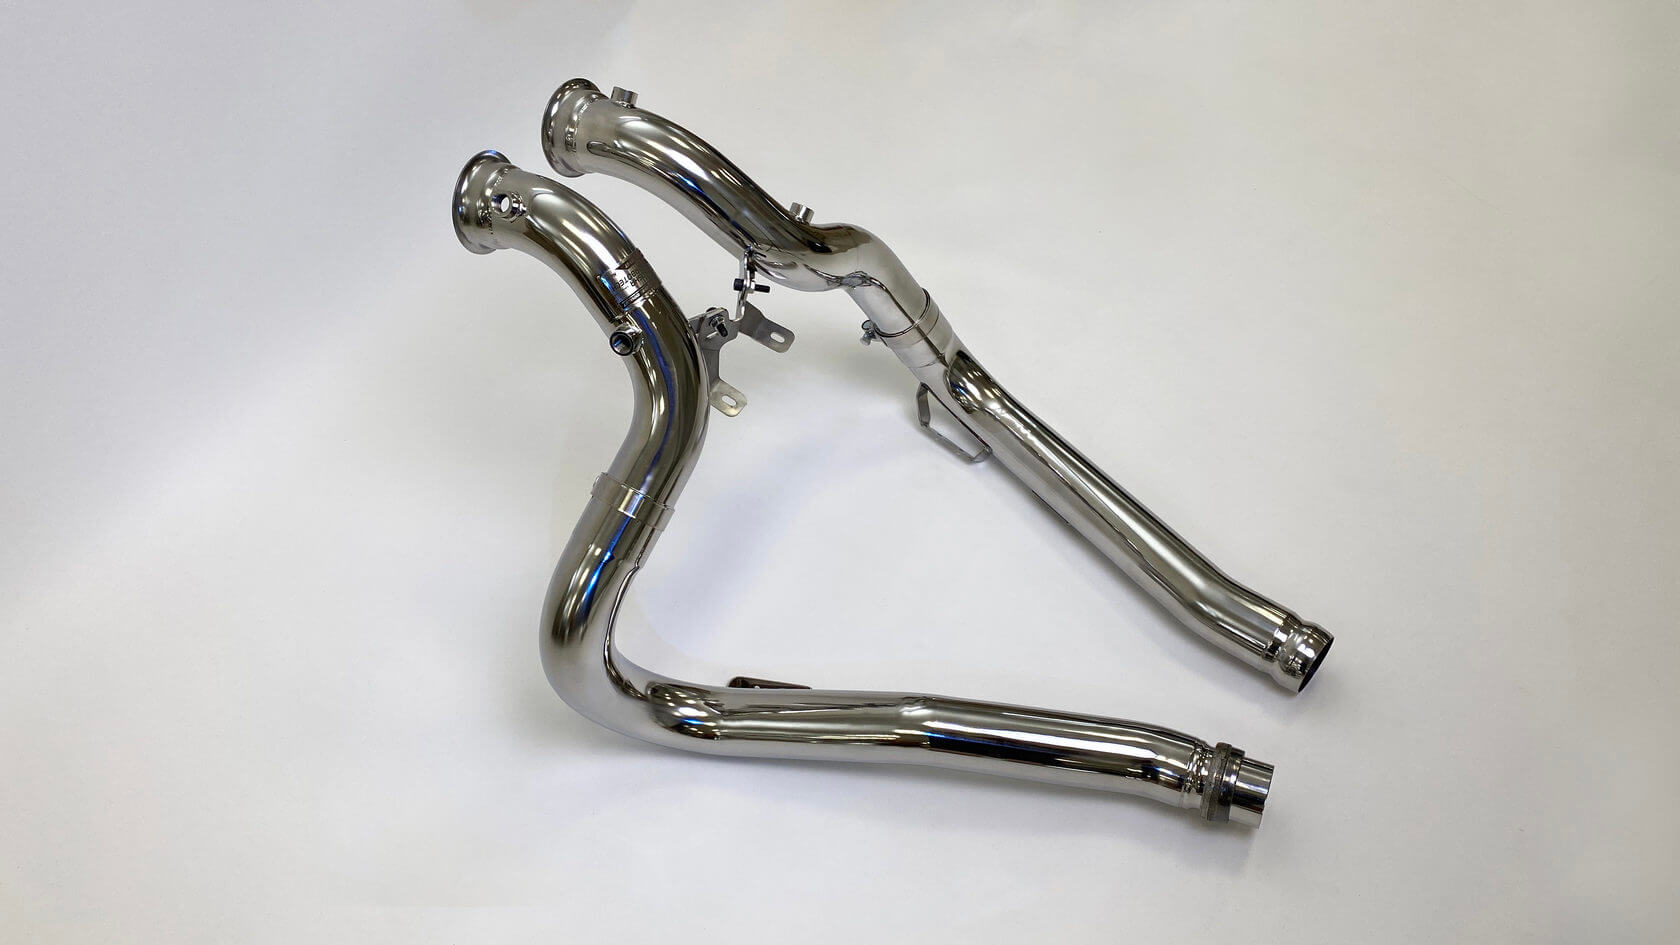 DEIKIN 10-MB.GT63s.C190.C190-DPT Downpipe for Mercedes-AMG GT 63s (C190) with thermal insulation HeatShield Photo-0 